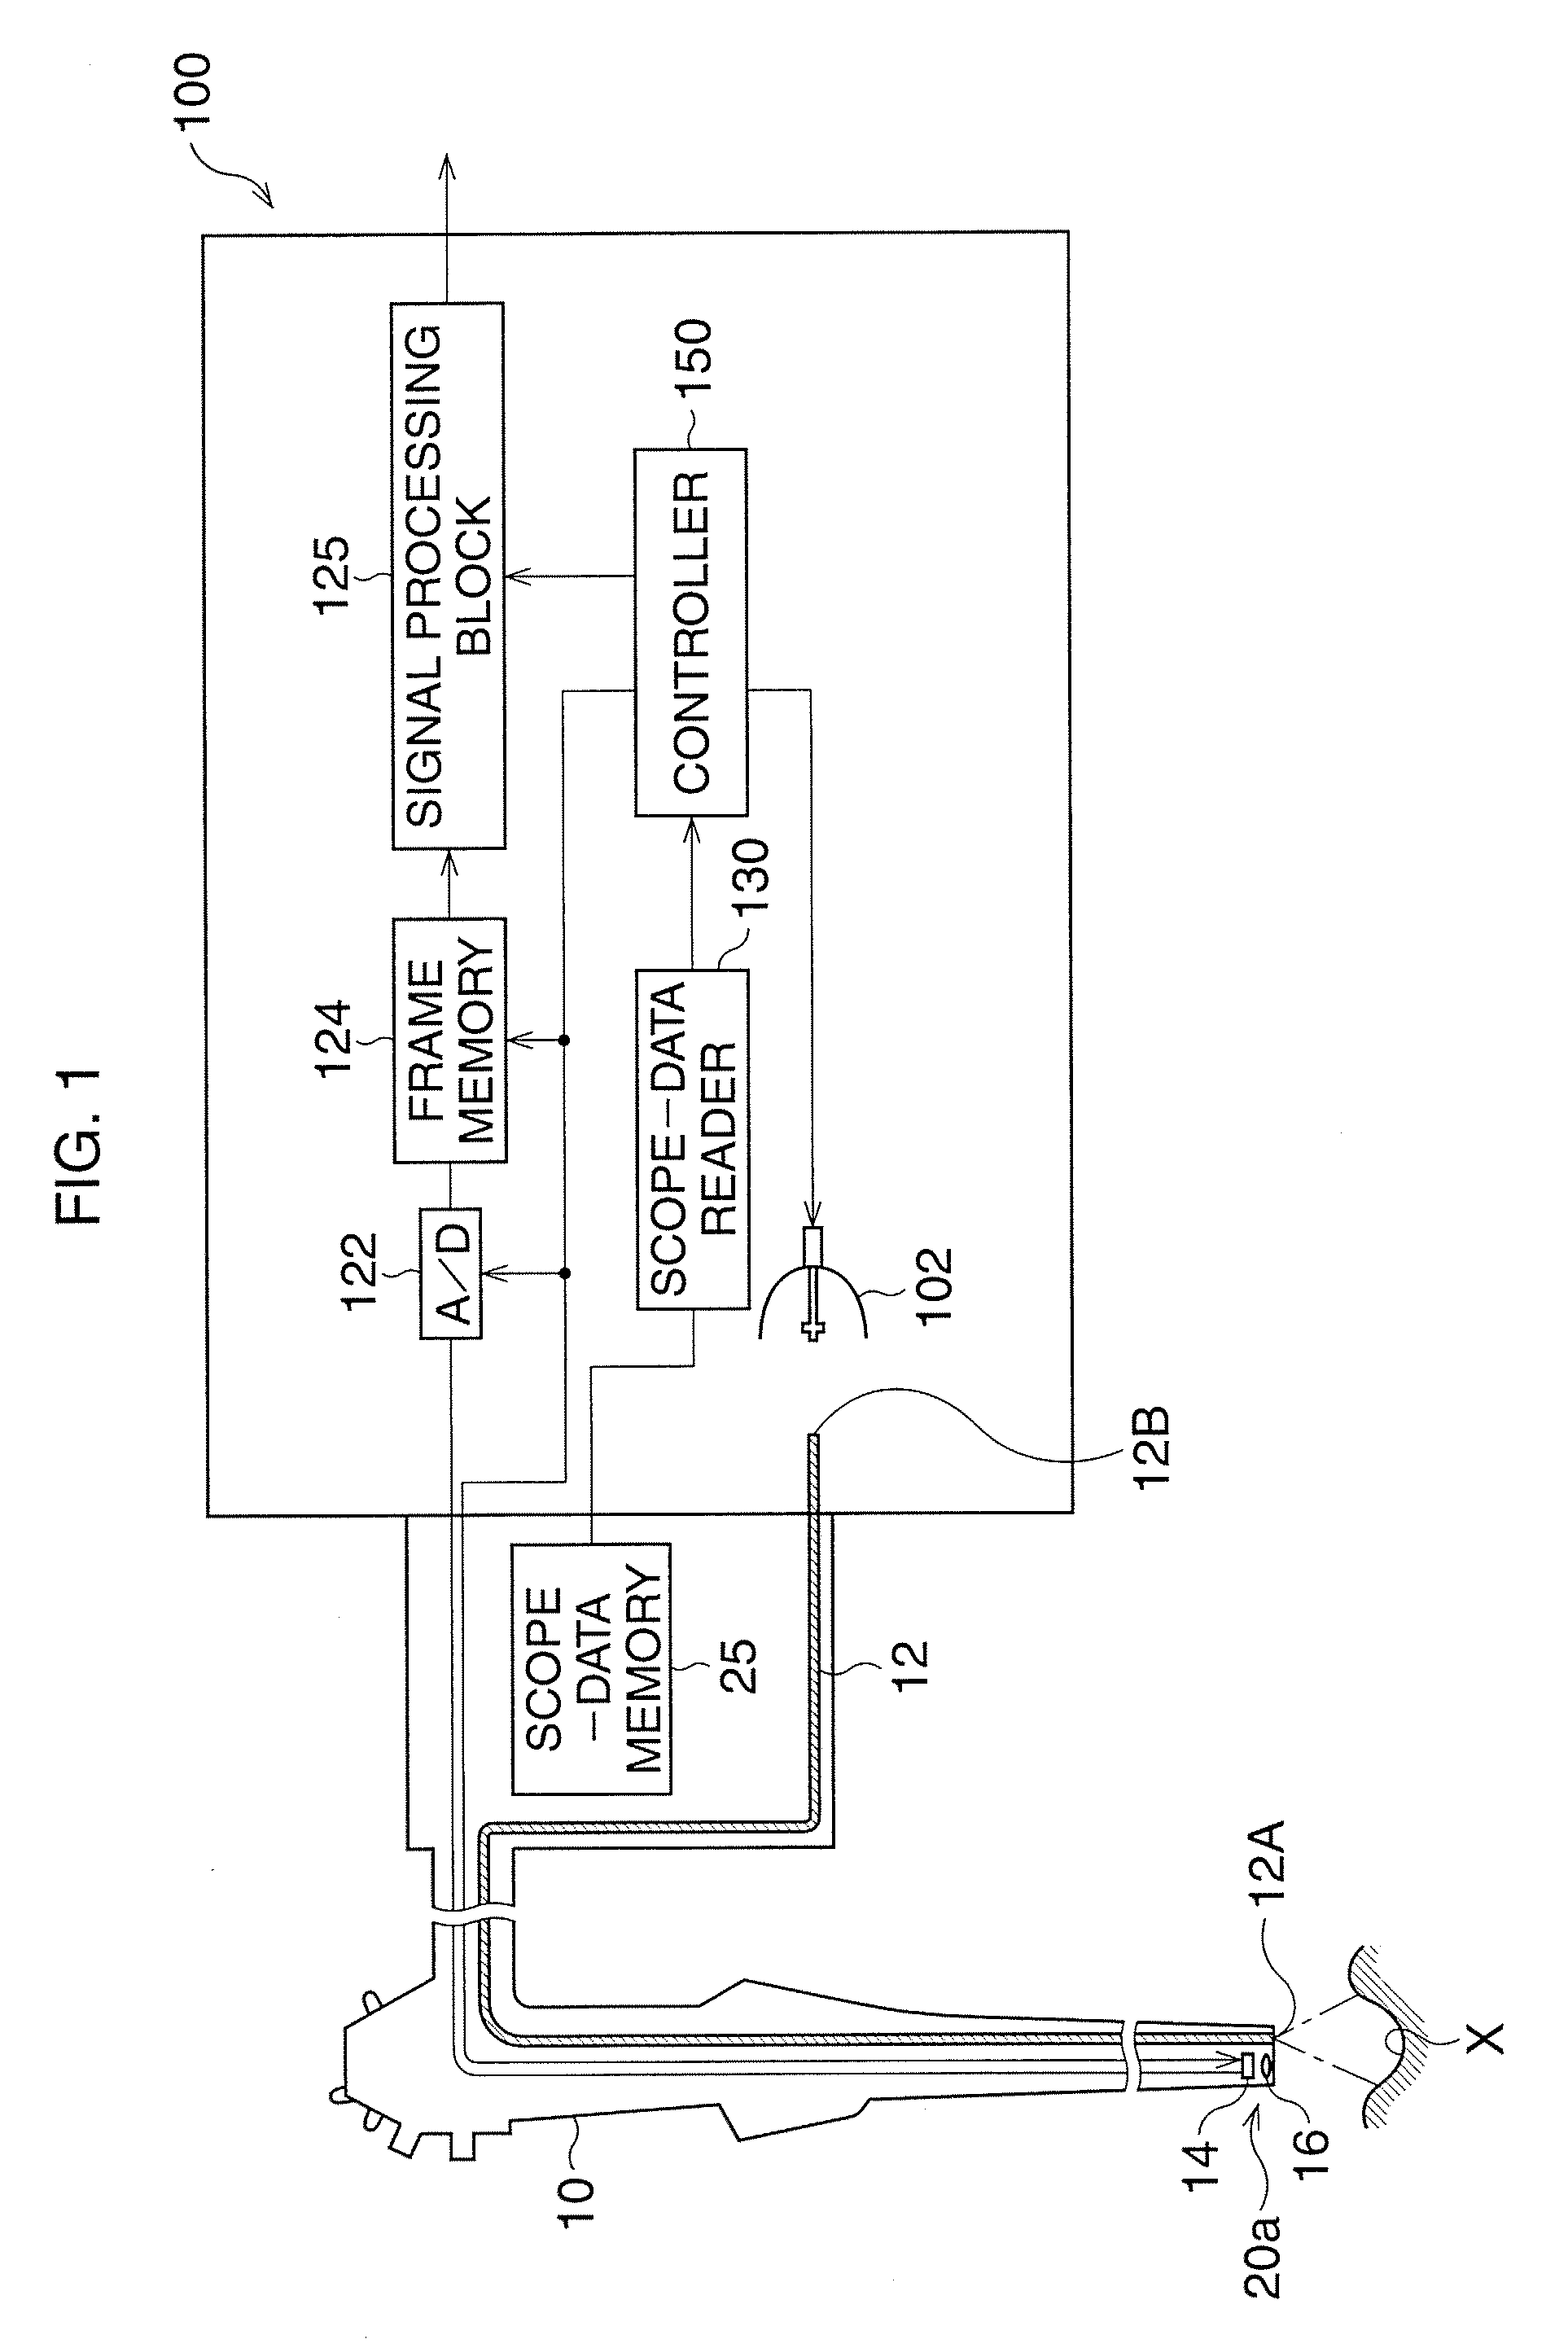 Image signal processing device and method of image signal processing